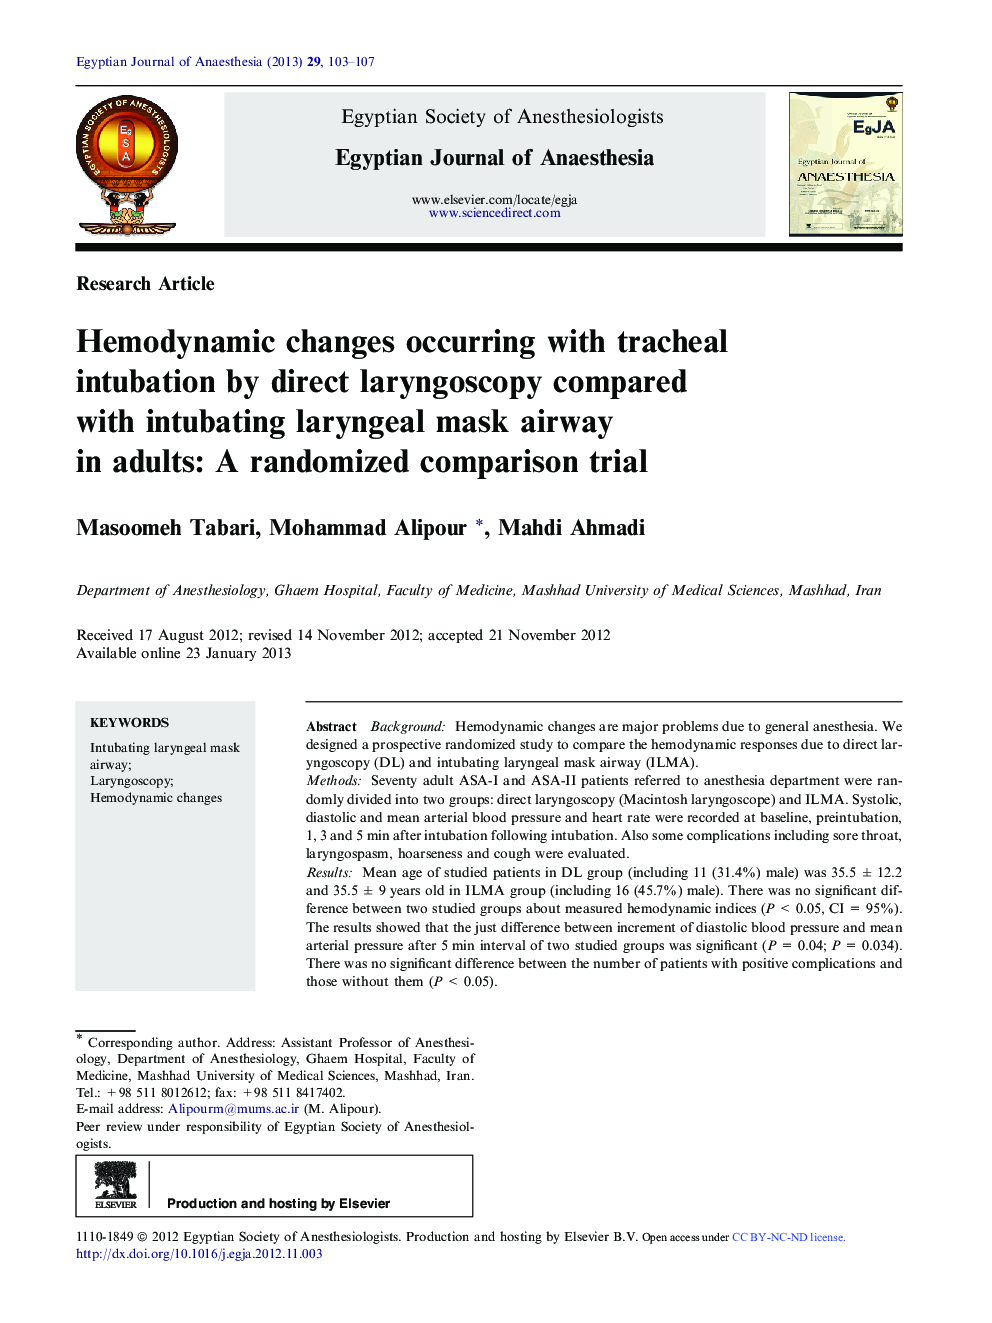 Hemodynamic changes occurring with tracheal intubation by direct laryngoscopy compared with intubating laryngeal mask airway in adults: A randomized comparison trial 